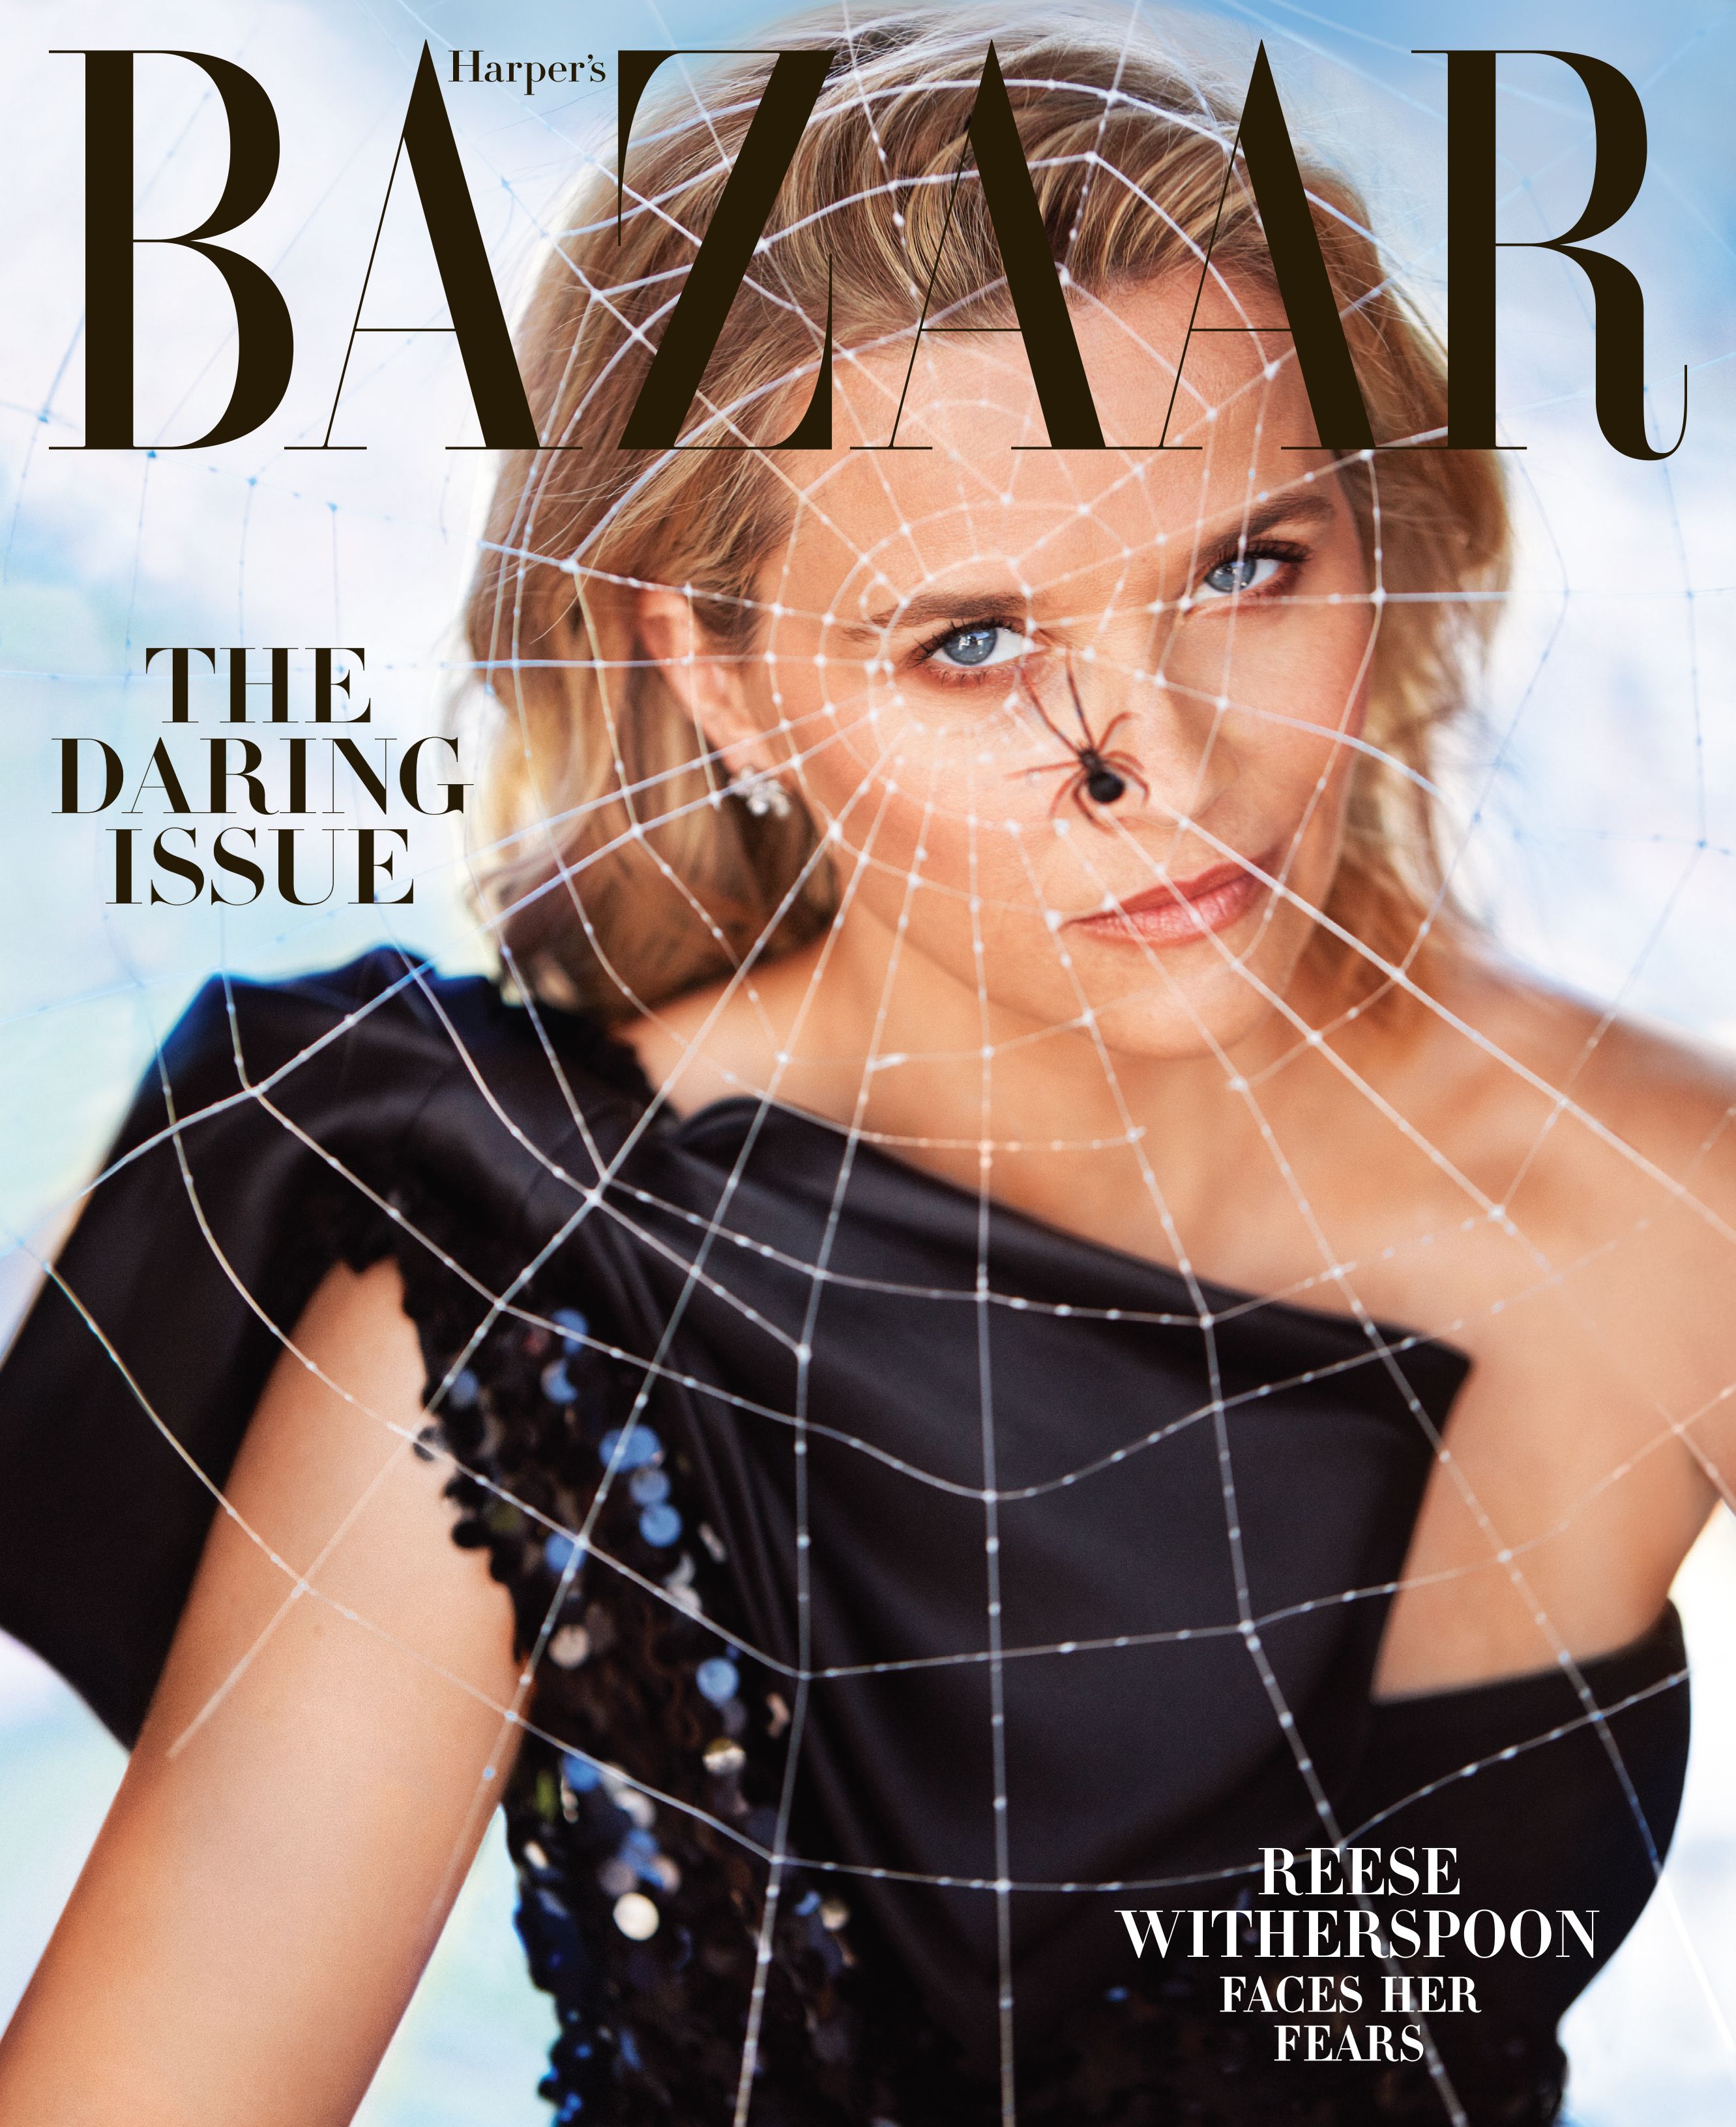 august 2023 Harper Bazaar Reese Witherspoon cover " The